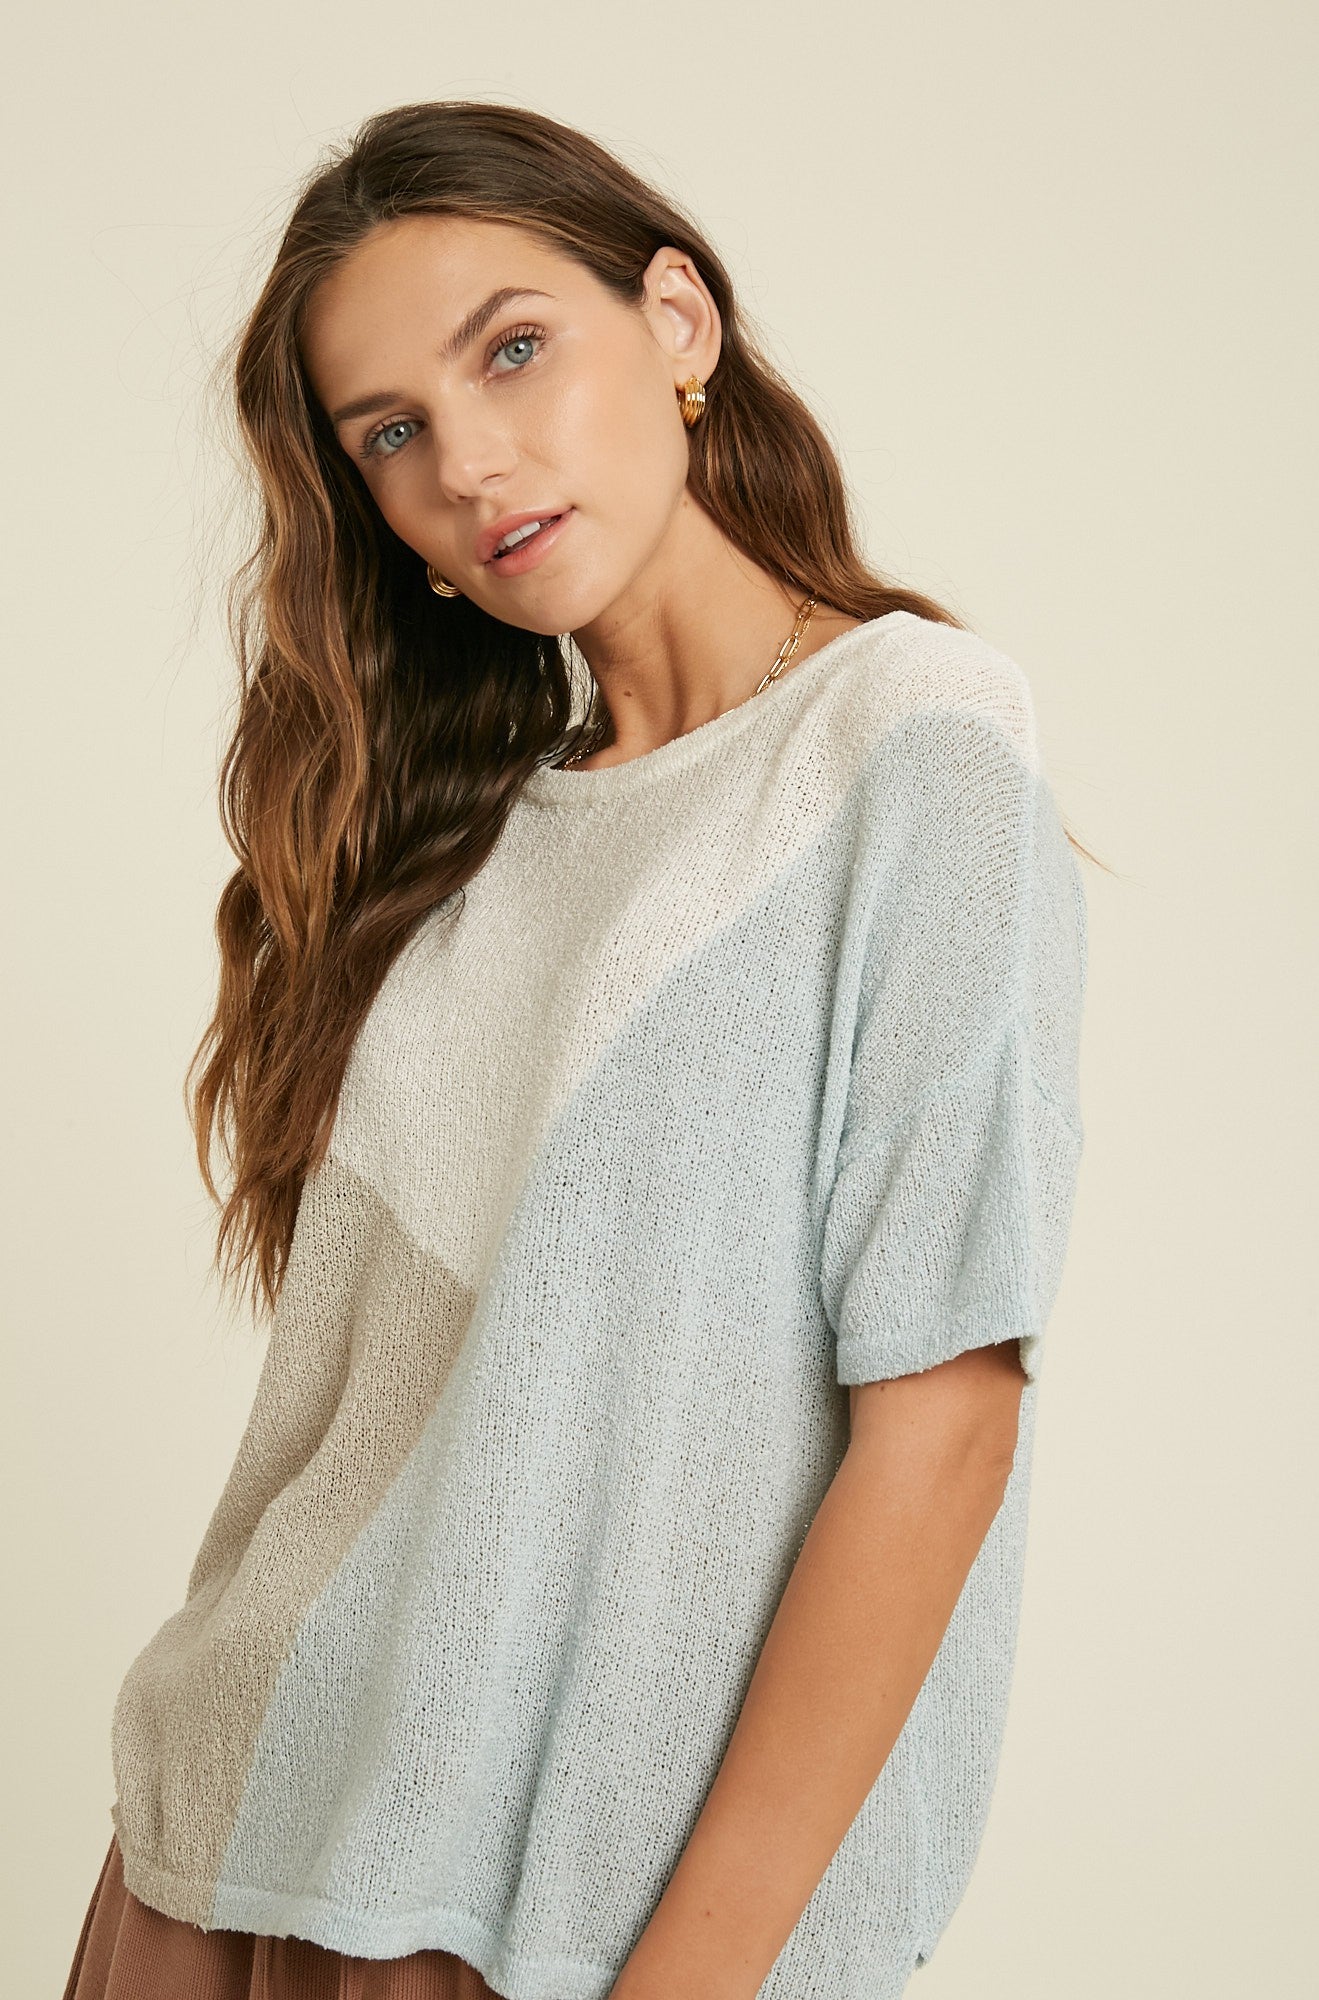 The Blakely Colorblock Knit Top